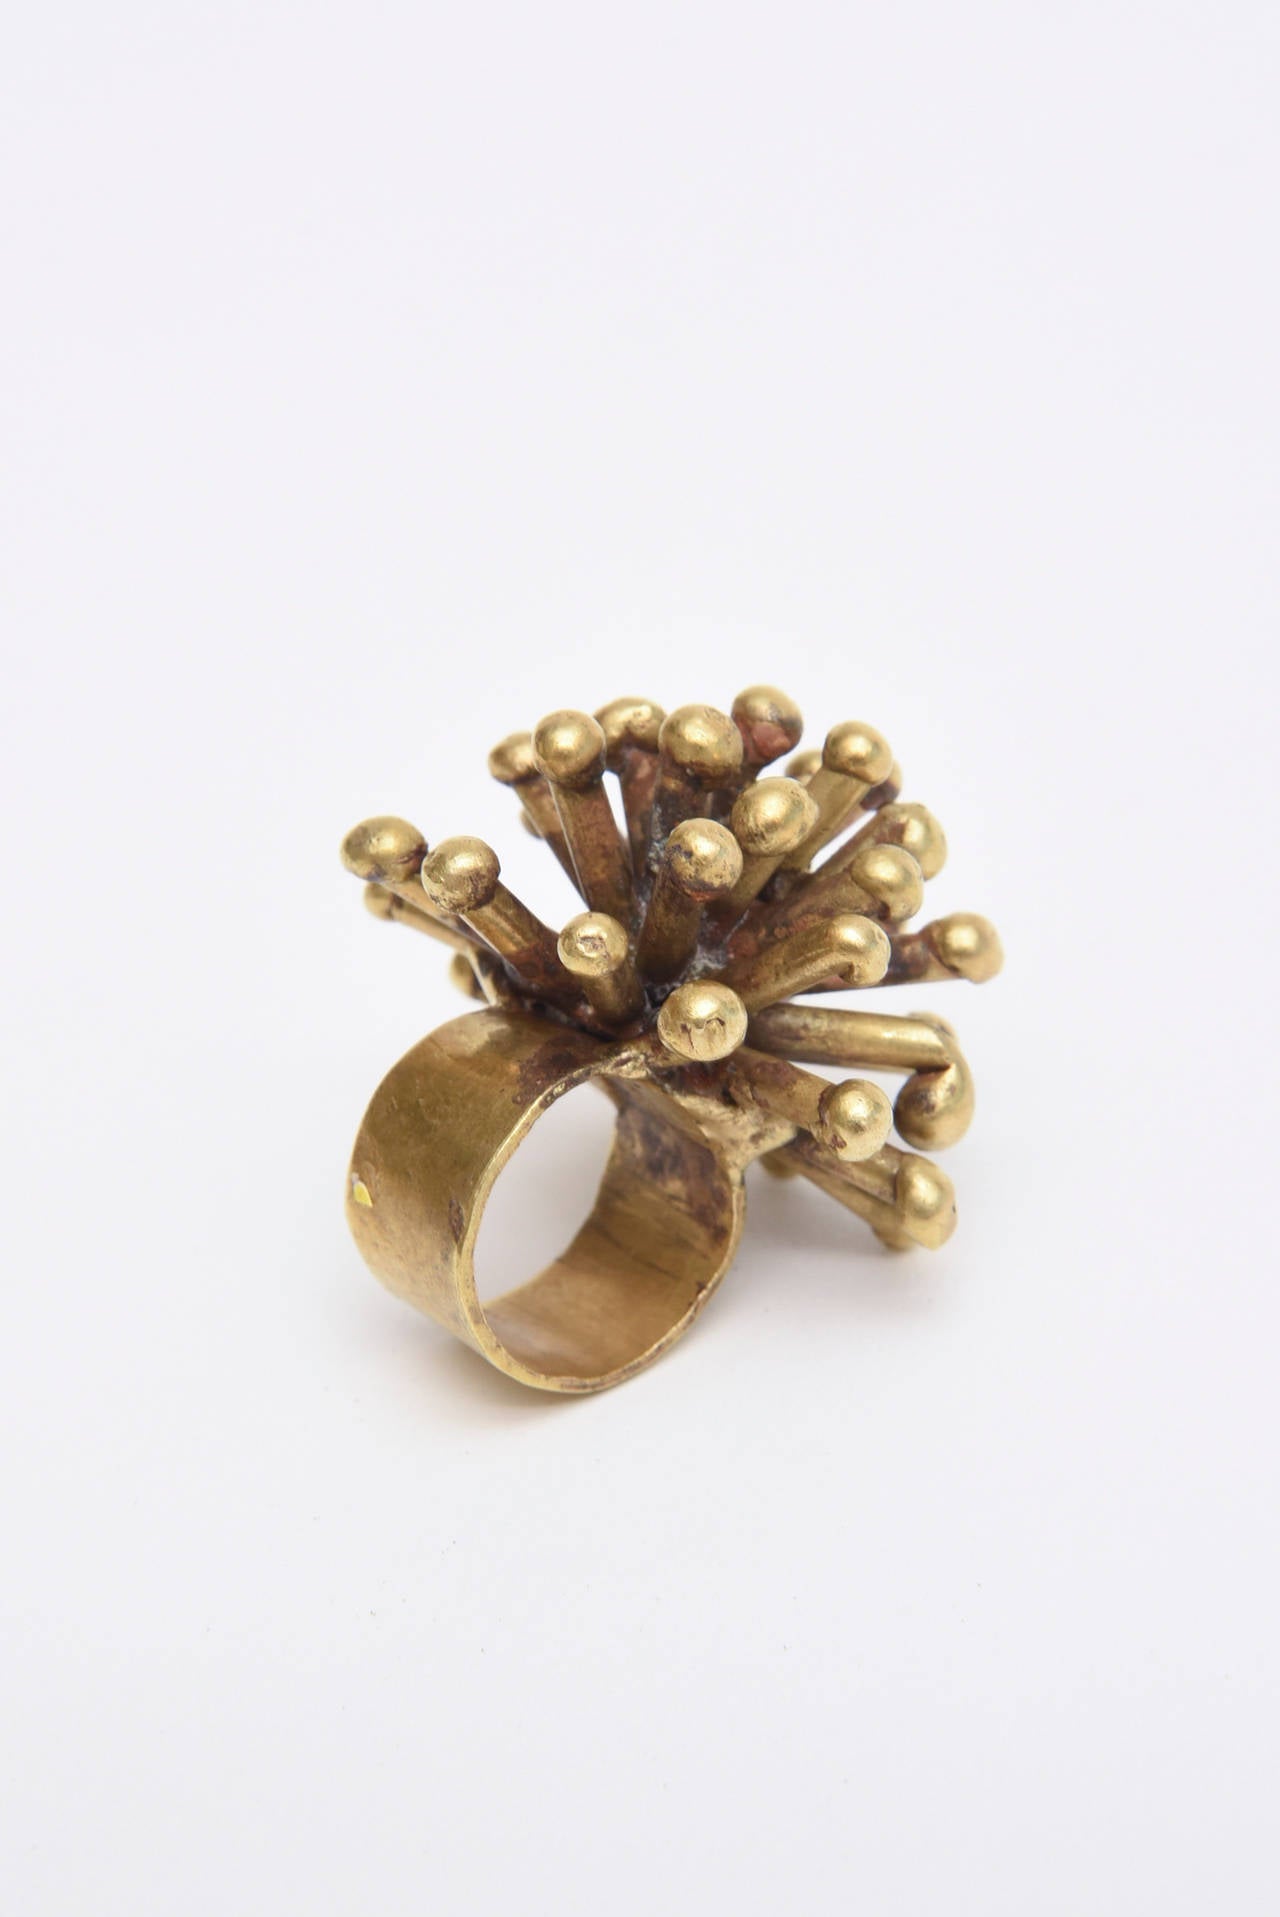 This bronze sculptural Sputnik ring has a studio feel to it. It is unsigned and has been attributed to the wonderful work of artist Pal Kepenes. It makes quite the statement. It has spokes going in all directions finished with rounded ball like